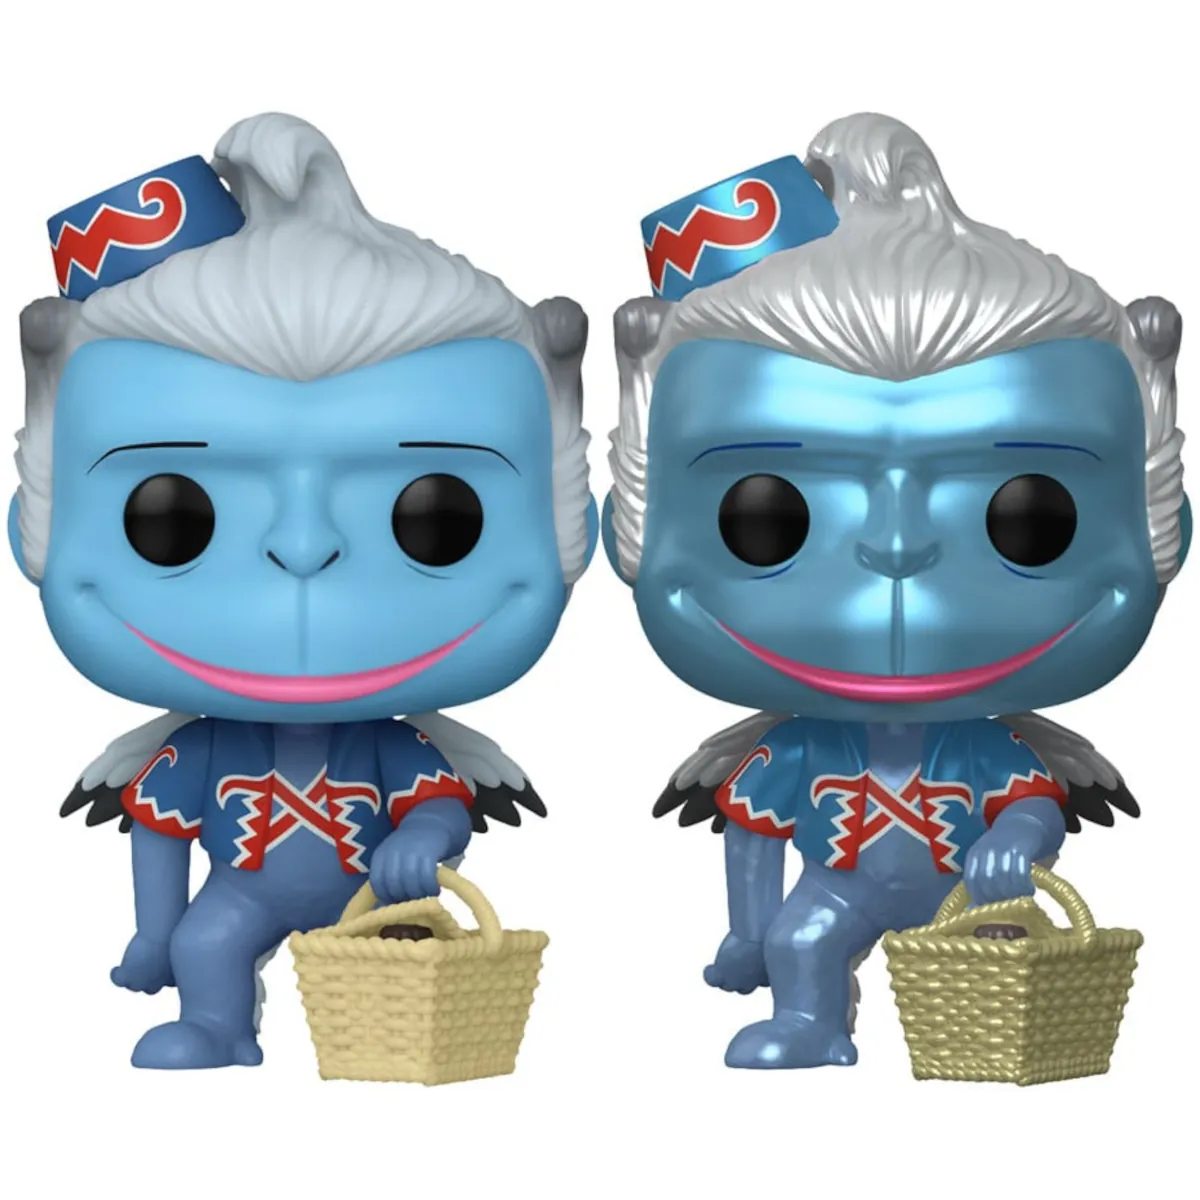 FK77423 Funko Pop! Movies – The Wizard of Oz (85th Anniversary) – Winged Monkey Collectable Vinyl Figure